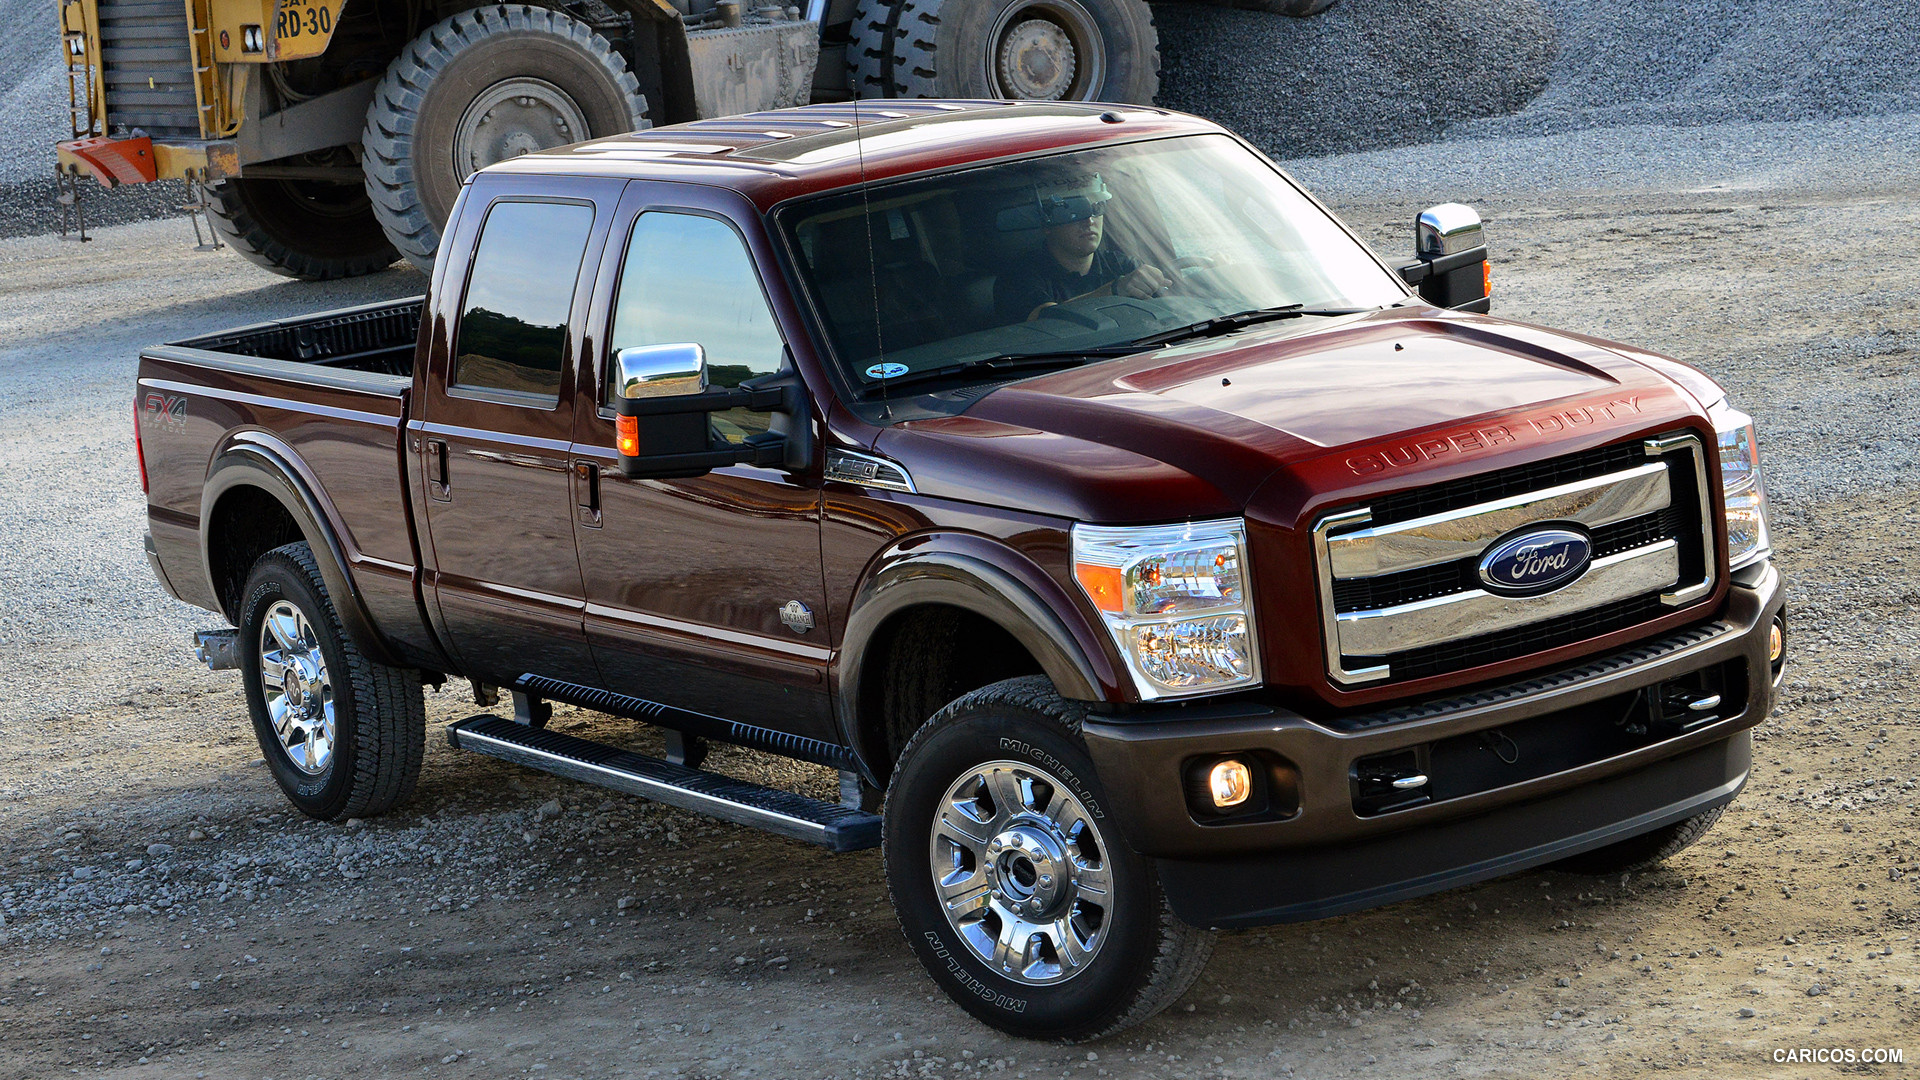 1920x1080 > 2015 Ford F-Series Super Duty Wallpapers